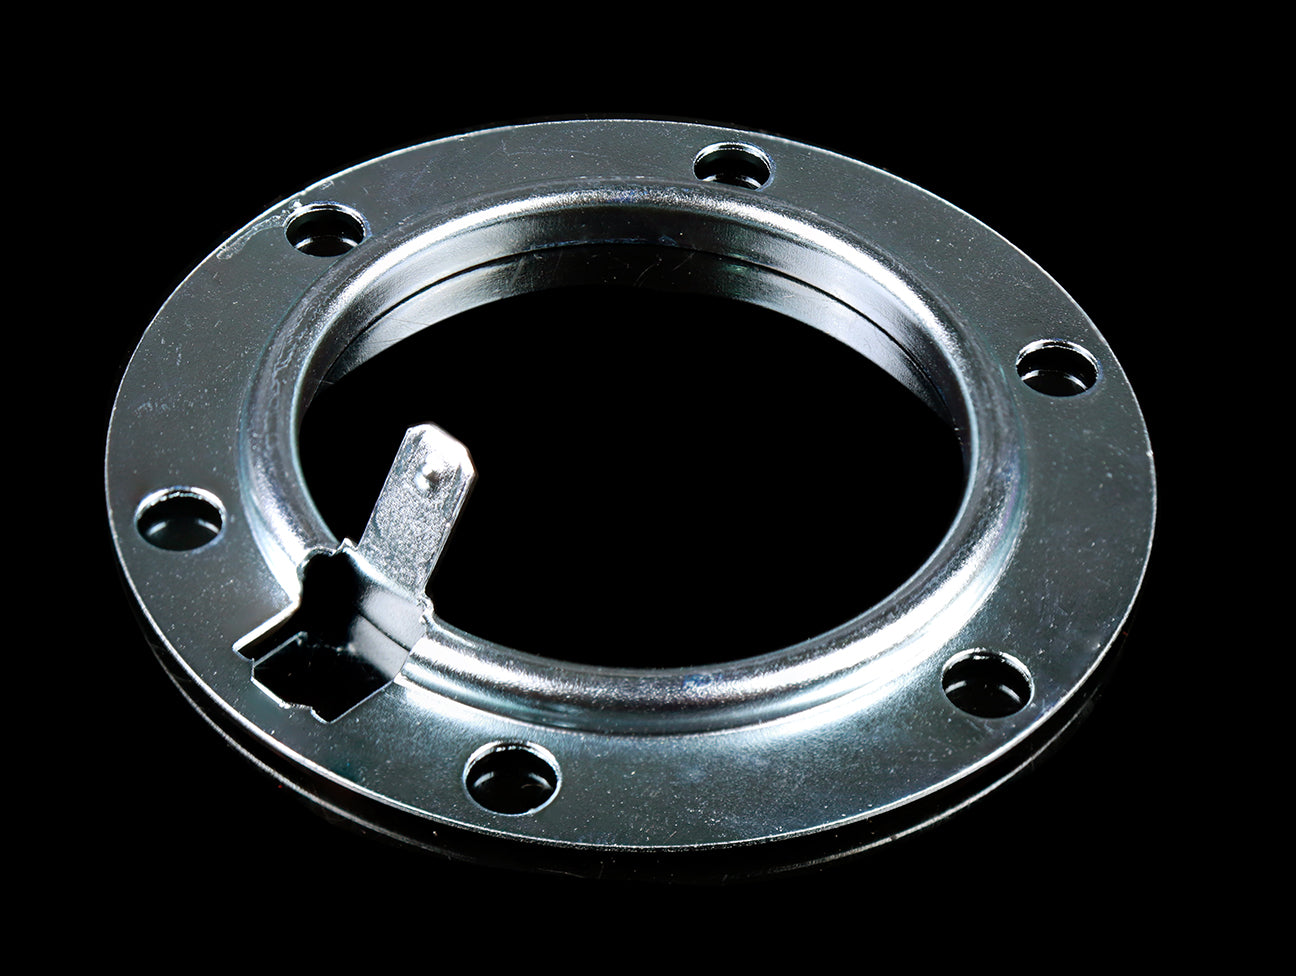 Universal Horn Button Retainer Ring